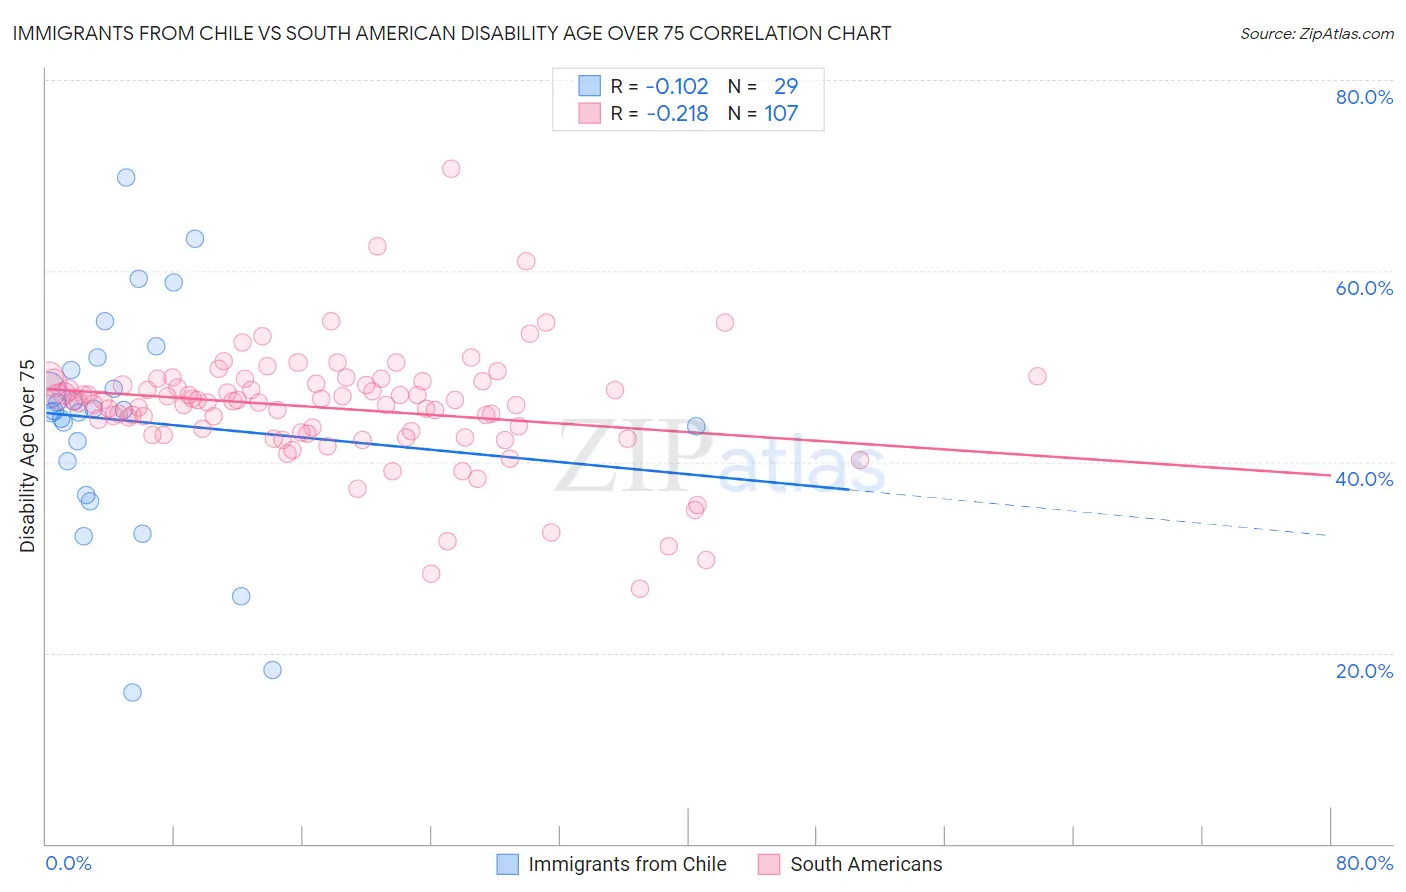 Immigrants from Chile vs South American Disability Age Over 75